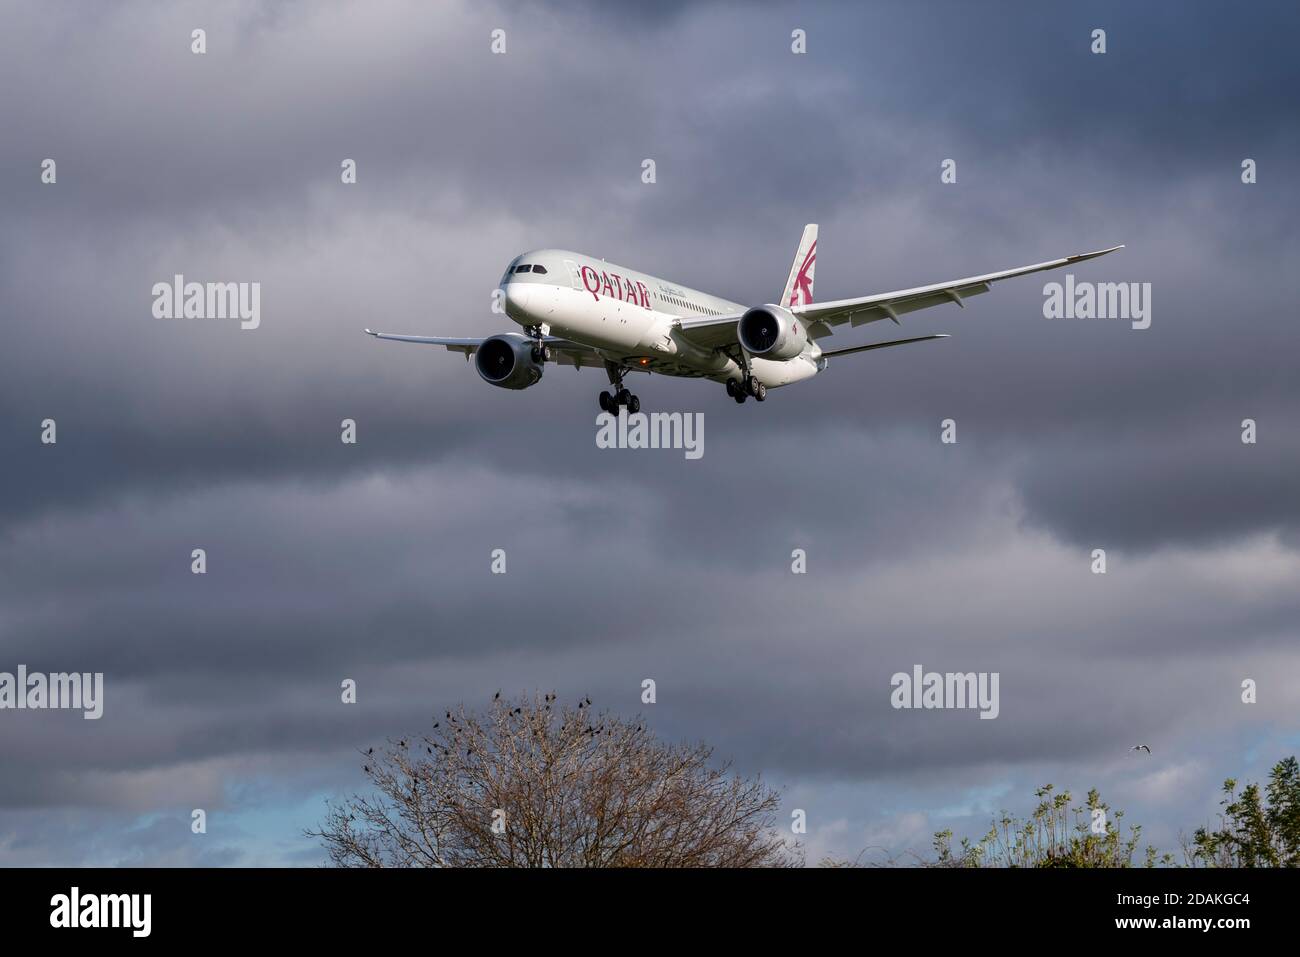 Qatar Airways Boeing 787 jet airliner plane A7-BHG on approach to land at London Heathrow Airport, UK, during the second national COVID 19 lockdown Stock Photo